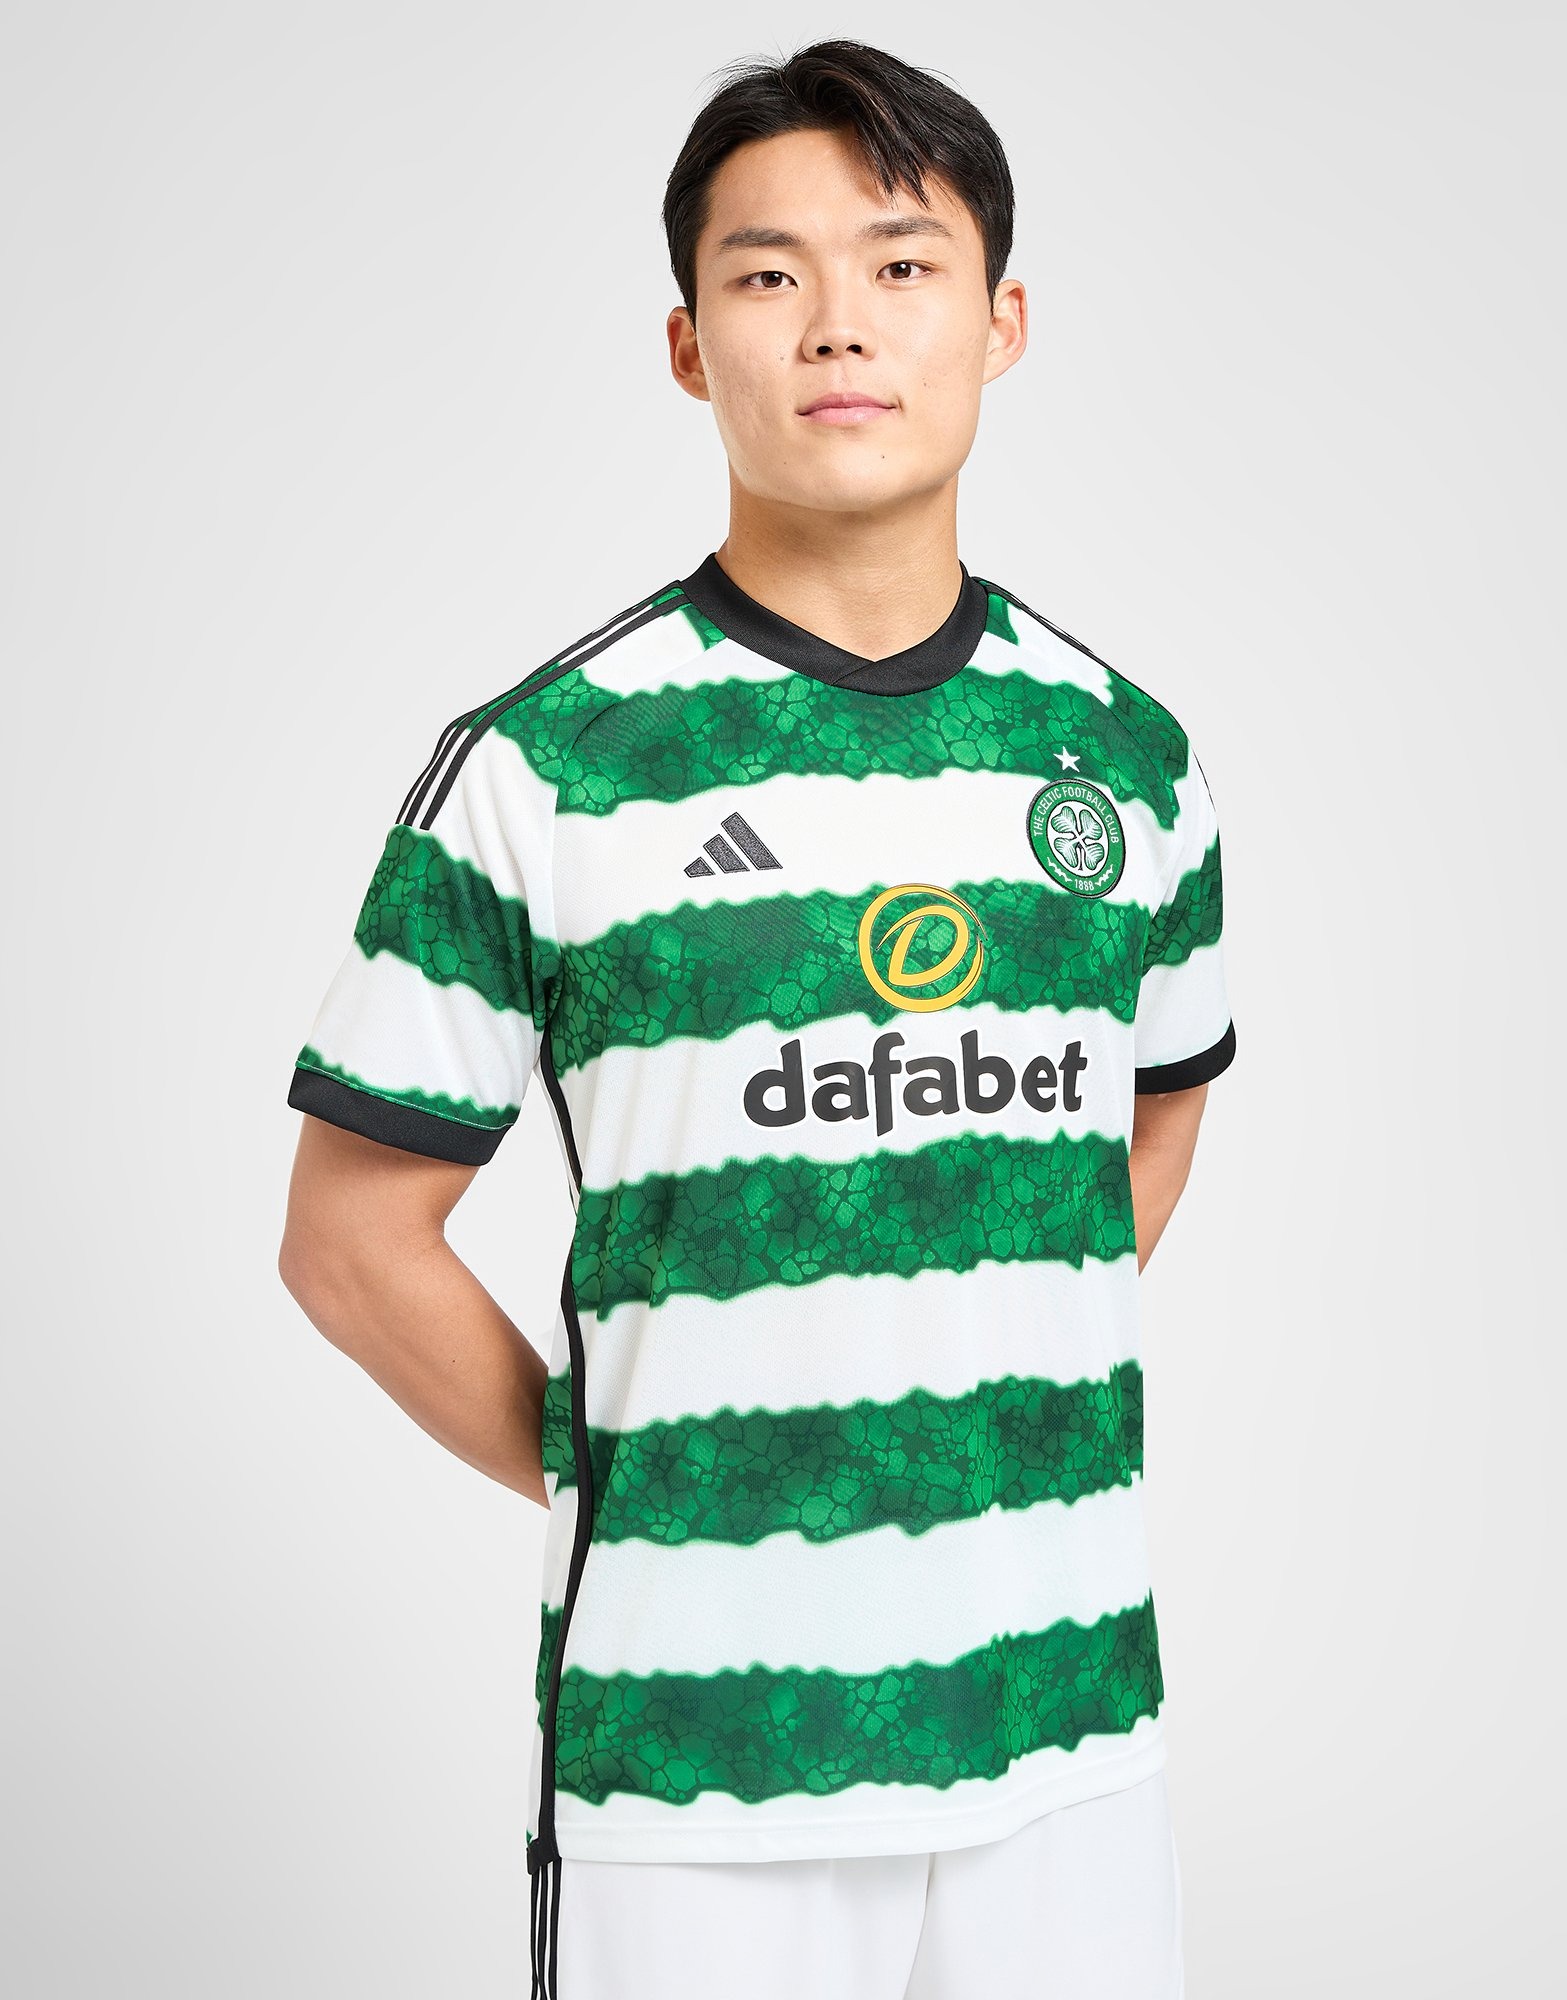 Adidas Celtic FC Home Shirt: Design, Materials, and Shipping Information